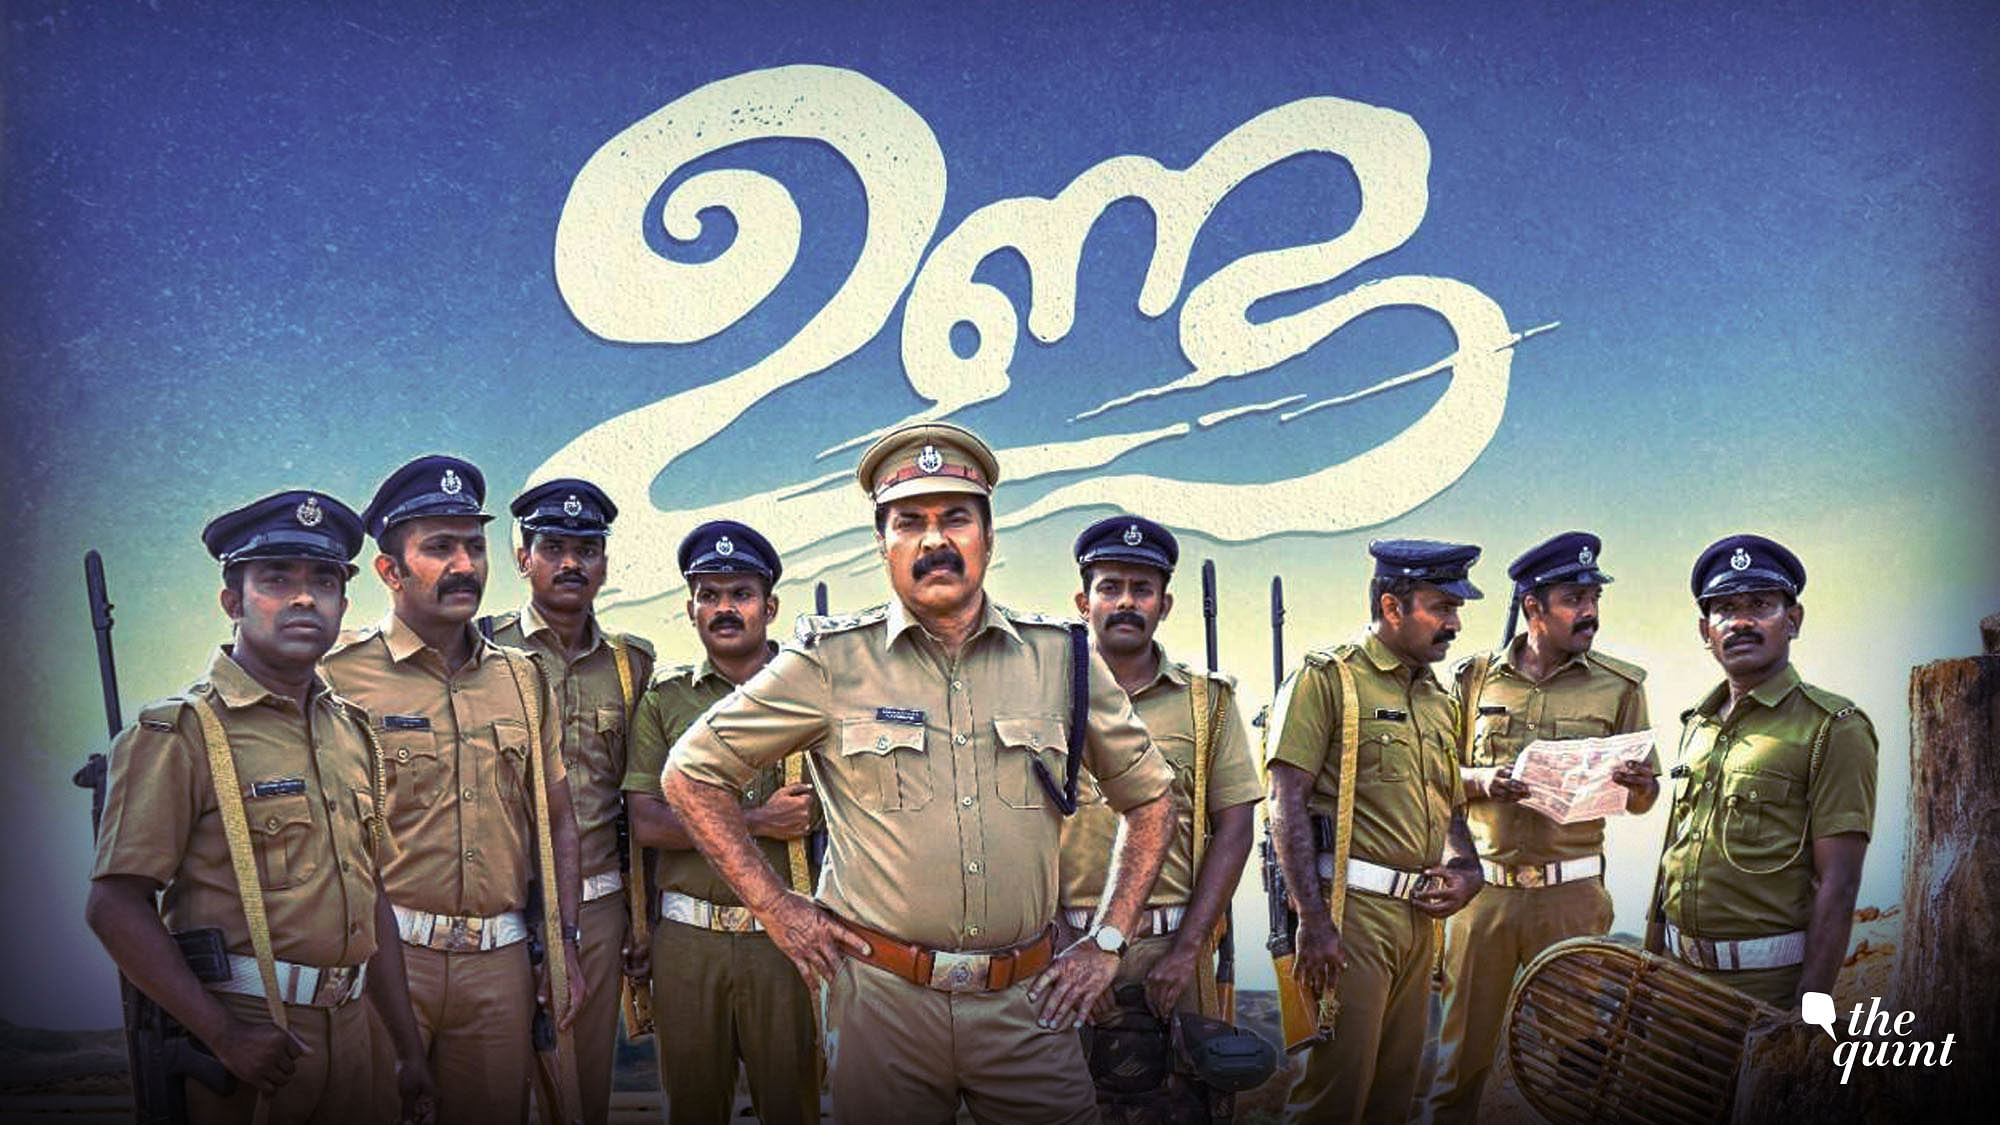 Mammootty plays the role of a cop who heads a team of Kerala police in Bastar for election duty.&nbsp;